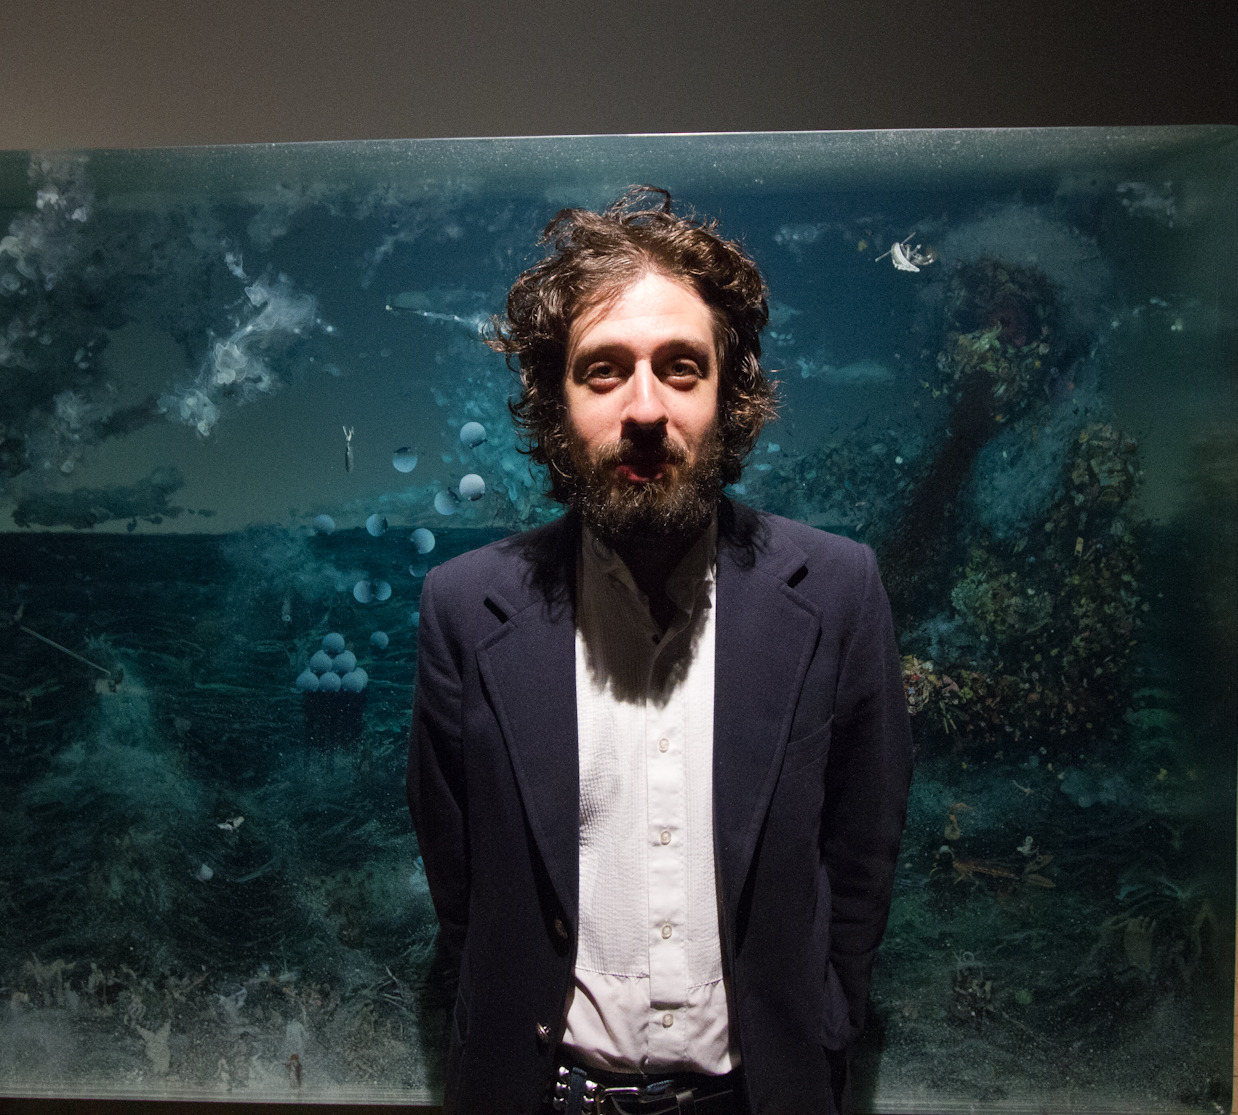 Dustin Yellin (b. 1975 Los Angeles, California)
Portrait from the artist&rsquo;s tumblr (Adam Green in front of Yellin&rsquo;s work)
Dustin Yellin is a renaissance man who, through many good fortunes, has come to develop quite a reputation in Redhook, Brooklyn. Besides having an incredible direction for his artistic works, Yellin also manages the real estate development for the warehouses he owns and has renovated into multiple nonprofit artist residency programs (including Kidd Yellin and a yet unnamed space on the corners of Pinoneer and King in Redhook) while also starting a new magazine called INTERCOURSE. Most famous for his layered drawings, Yellin works with both glass and resin to fixate found objects, drawings and oils into his three-dimensional works. Playing with natural and artificial lights, the layered pieces cast shadows on the walls in the gallery, creating unique atmospheres with each piece. When working with resin, the process involves a meticulous repetitive layering of the resin, allowing it to dry, drawing upon each layer, and repeat, until the large full work of art is created. Glass, as a medium, allows for the suspension of drawings between thin layers, similar to that of a microscopic slide. It is clear how the layers and parts develop the whole that is each piece. His works serve to simplify the complications but not erase them. For Yellin, it is that fragmentation of these complicated realities that allows viewers to comprehend the information, understanding the vast systems that may be discouragingly overwhelming otherwise.